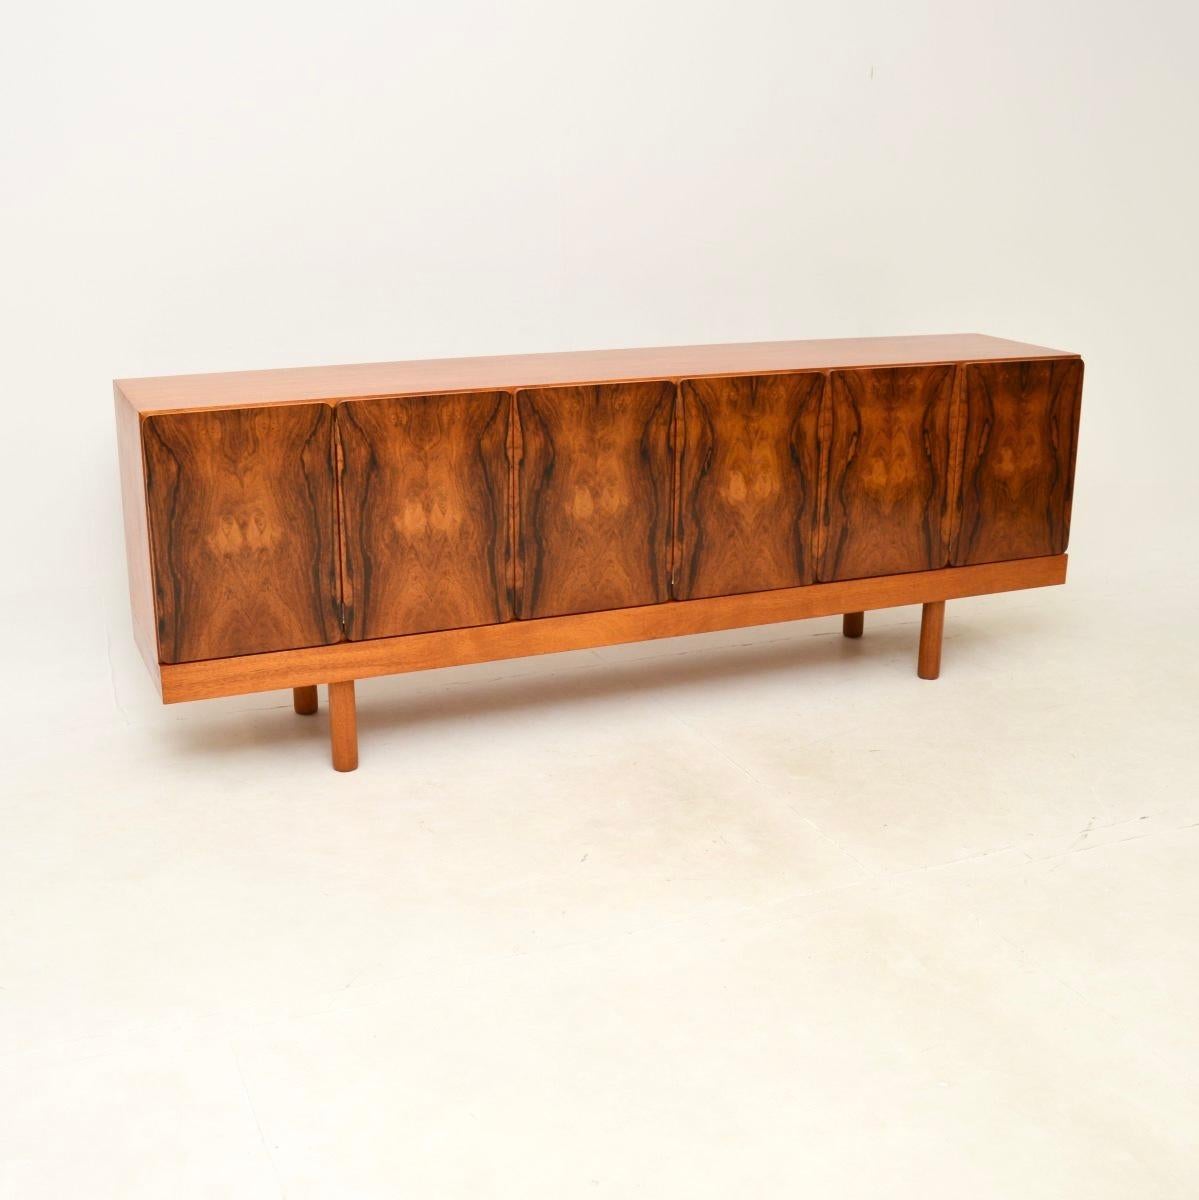 A rare and extremely beautiful vintage sideboard by Gordon Russell. This was made in England, it dates from the 1960’s.

The quality is outstanding, this is a great size with lots of useful storage space. The doors are beautifully curved at the